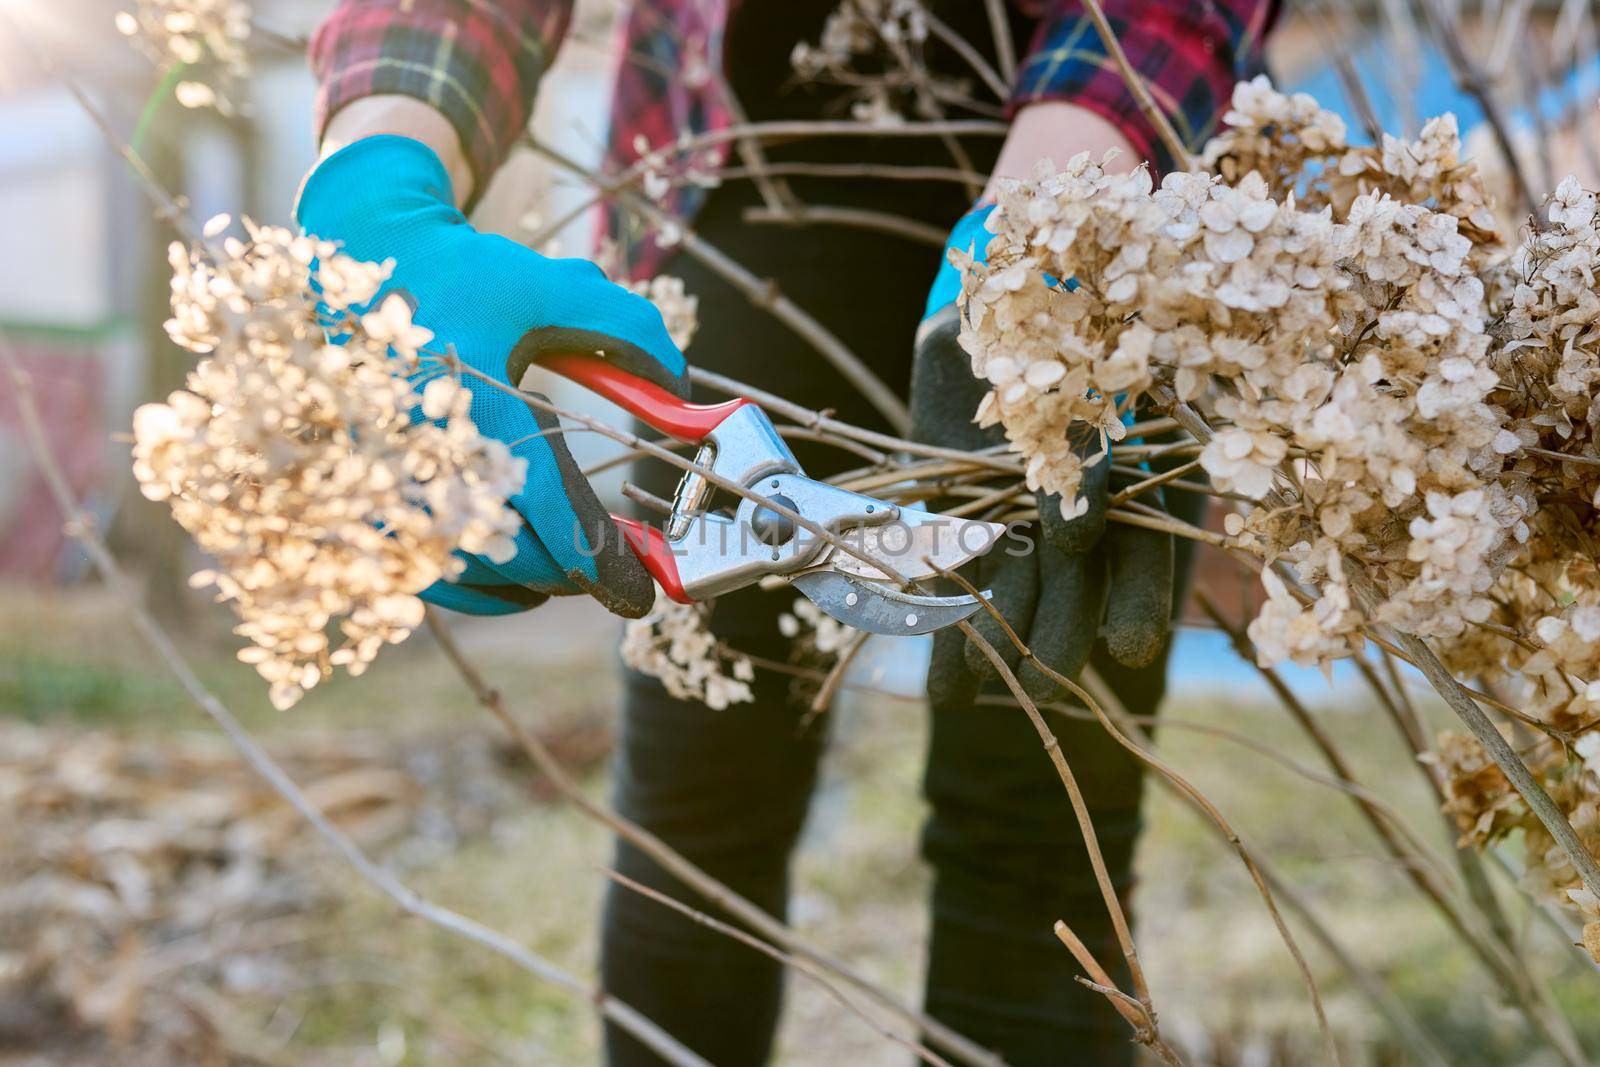 Seasonal spring work in the garden backyard, pruning hydrangea bush with pruning shears. Close-up of woman's hand with gloves with secateur and dry hydrangea flowers, springtime